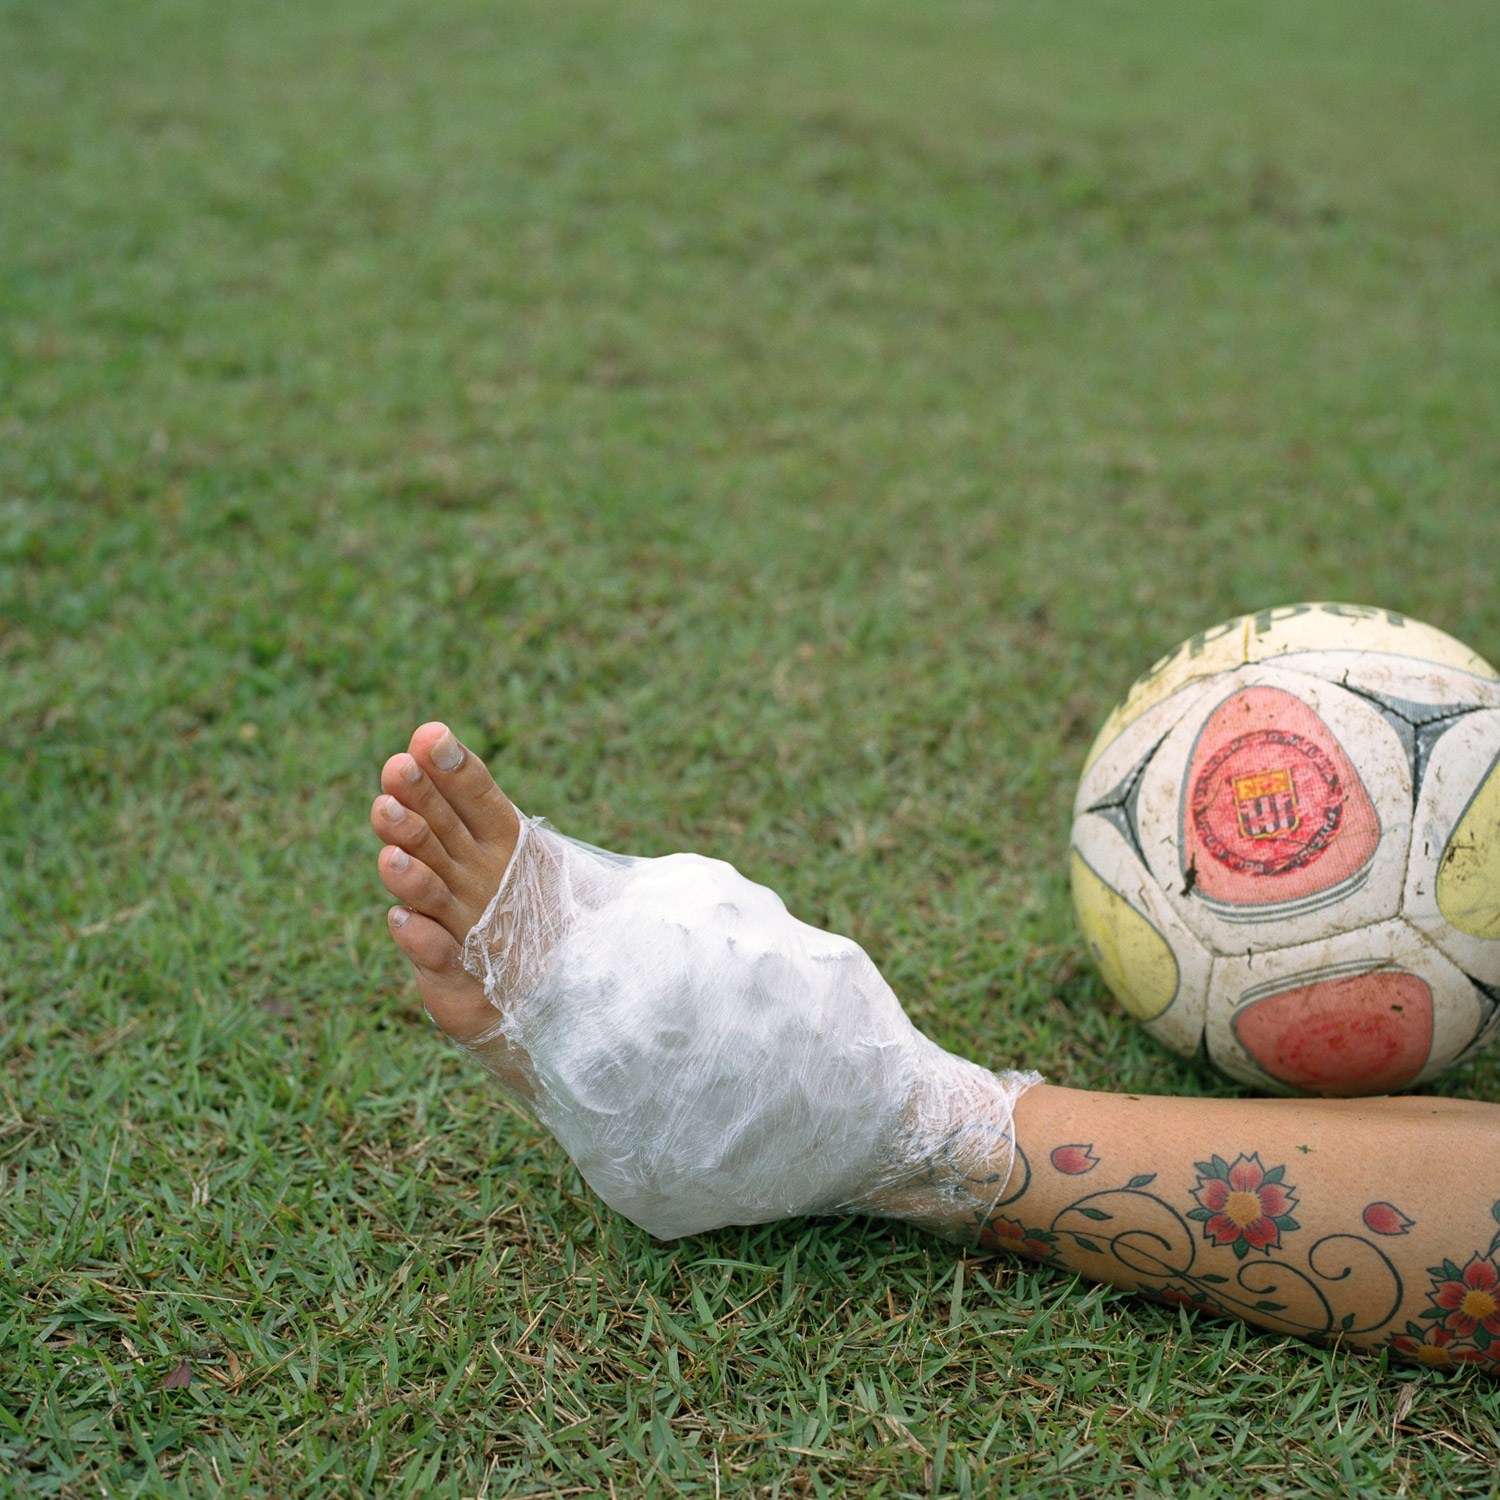 : Santos player, Calan, ices her ankle after a physical therapy training session at the Santos CT Rei Pelé training center. (December 1, 2010)